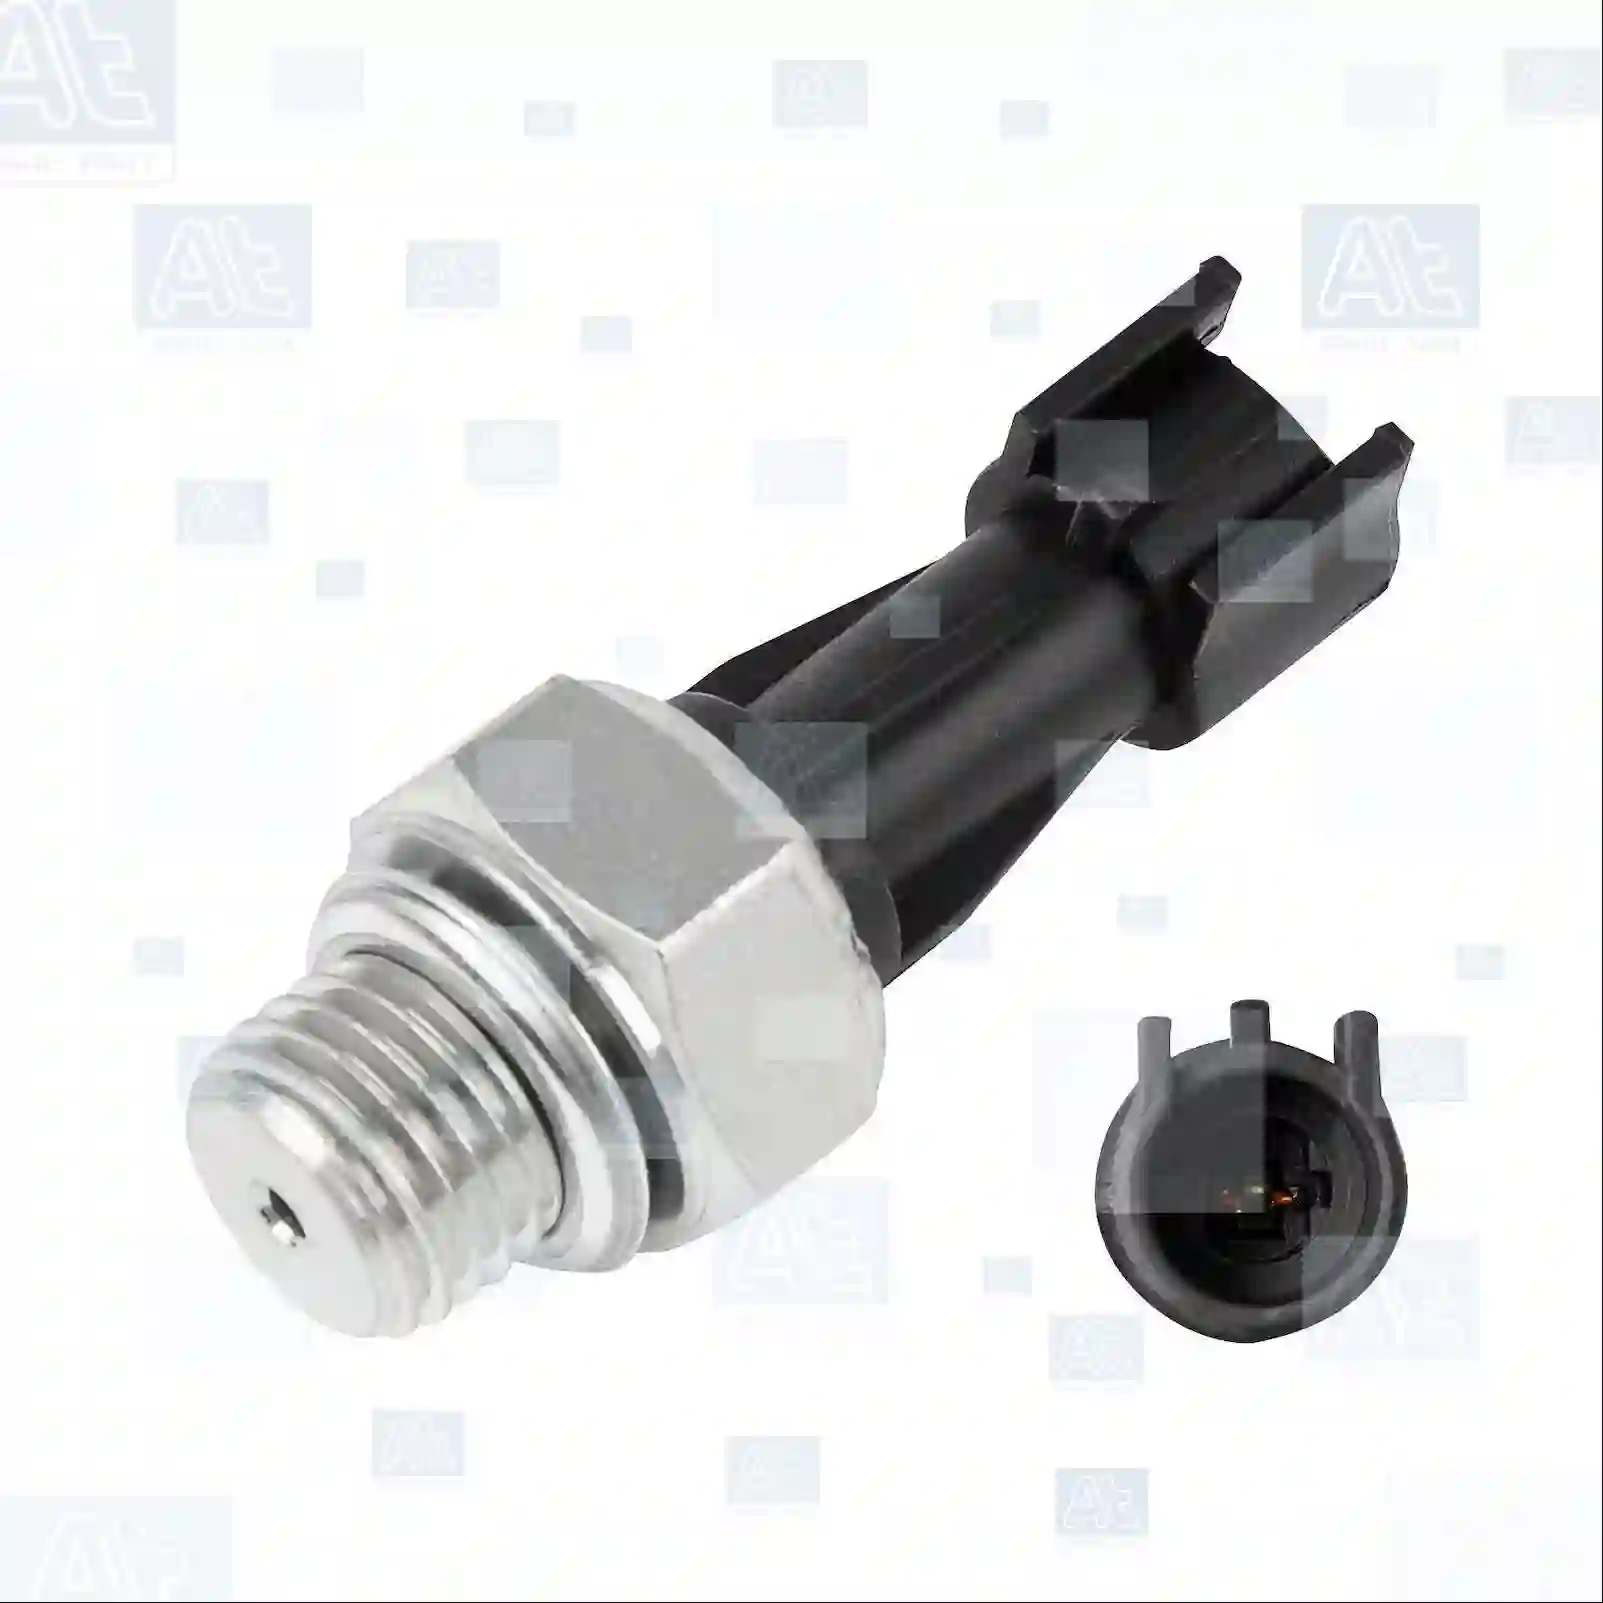 Oil pressure switch, at no 77700323, oem no: 55202374, 04859914, 07606596, 07681395, 07705830, 07706596, 07708168, 46420838, 500312468, 50008757, 55202374, 60593844, 60593845, 60593847, 60805536, 60807244, 60807764, 60808371, 60813321, 71749462, 25180905, 55202374, 95961350, 96281689, 96494264, 96647339, 55202374, 113198, 1131C7, 1131J5, 1131J9, 1131K7, 46420838, 4859914, 50008757, 500312468, 55202374, 60593844, 60593845, 60807244, 60808371, 71749462, 7681395, 7705830, 7706596, K68096456AA, 04859913, 04859914, 07606596, 07681395, 07705830, 07706596, 07708168, 46420838, 46472027, 500312468, 50008757, 55202374, 60593844, 60593845, 60807244, 60808371, 60813321, 71749462, 1535416, 25180905, 55202374, 55354378, 6240251, 6340415, 90335039, 90336039, 90507539, 90569684, 93177490, 93193582, 93318082, 95961350, 96494264, 96647339, 4708758, 4818219, 55202374, 6240251, 6240415, 60593845, 8-90336039-0, 04859914, 4859914, 55202374, 55202374, K68070741AA, K68096456AA, K68275324AA, 04859913, 04859914, 07606596, 07681395, 07705830, 07706596, 07708168, 46420838, 500312468, 50008757, 55202374, 60593844, 60593845, 60807244, 60808371, 60813321, 71749462, 1252557, 1252562, 1252570, 1252572, 1252578, 4708758, 4803551, 4817876, 4818219, 6240251, 6240415, 6340415, 113198, 1131C7, 1131J5, 1131J9, 1131K7, 4504585, 55202374, 55354378, 5962816, 93177490, 9544610, 50981, 1658285E00, 16582-79J50, 16582-79J50-000, 16582-85E00, 16582-85E00-000, 37820-86J00, 37820-86J00-000, 37820-N86J0-000 At Spare Part | Engine, Accelerator Pedal, Camshaft, Connecting Rod, Crankcase, Crankshaft, Cylinder Head, Engine Suspension Mountings, Exhaust Manifold, Exhaust Gas Recirculation, Filter Kits, Flywheel Housing, General Overhaul Kits, Engine, Intake Manifold, Oil Cleaner, Oil Cooler, Oil Filter, Oil Pump, Oil Sump, Piston & Liner, Sensor & Switch, Timing Case, Turbocharger, Cooling System, Belt Tensioner, Coolant Filter, Coolant Pipe, Corrosion Prevention Agent, Drive, Expansion Tank, Fan, Intercooler, Monitors & Gauges, Radiator, Thermostat, V-Belt / Timing belt, Water Pump, Fuel System, Electronical Injector Unit, Feed Pump, Fuel Filter, cpl., Fuel Gauge Sender,  Fuel Line, Fuel Pump, Fuel Tank, Injection Line Kit, Injection Pump, Exhaust System, Clutch & Pedal, Gearbox, Propeller Shaft, Axles, Brake System, Hubs & Wheels, Suspension, Leaf Spring, Universal Parts / Accessories, Steering, Electrical System, Cabin Oil pressure switch, at no 77700323, oem no: 55202374, 04859914, 07606596, 07681395, 07705830, 07706596, 07708168, 46420838, 500312468, 50008757, 55202374, 60593844, 60593845, 60593847, 60805536, 60807244, 60807764, 60808371, 60813321, 71749462, 25180905, 55202374, 95961350, 96281689, 96494264, 96647339, 55202374, 113198, 1131C7, 1131J5, 1131J9, 1131K7, 46420838, 4859914, 50008757, 500312468, 55202374, 60593844, 60593845, 60807244, 60808371, 71749462, 7681395, 7705830, 7706596, K68096456AA, 04859913, 04859914, 07606596, 07681395, 07705830, 07706596, 07708168, 46420838, 46472027, 500312468, 50008757, 55202374, 60593844, 60593845, 60807244, 60808371, 60813321, 71749462, 1535416, 25180905, 55202374, 55354378, 6240251, 6340415, 90335039, 90336039, 90507539, 90569684, 93177490, 93193582, 93318082, 95961350, 96494264, 96647339, 4708758, 4818219, 55202374, 6240251, 6240415, 60593845, 8-90336039-0, 04859914, 4859914, 55202374, 55202374, K68070741AA, K68096456AA, K68275324AA, 04859913, 04859914, 07606596, 07681395, 07705830, 07706596, 07708168, 46420838, 500312468, 50008757, 55202374, 60593844, 60593845, 60807244, 60808371, 60813321, 71749462, 1252557, 1252562, 1252570, 1252572, 1252578, 4708758, 4803551, 4817876, 4818219, 6240251, 6240415, 6340415, 113198, 1131C7, 1131J5, 1131J9, 1131K7, 4504585, 55202374, 55354378, 5962816, 93177490, 9544610, 50981, 1658285E00, 16582-79J50, 16582-79J50-000, 16582-85E00, 16582-85E00-000, 37820-86J00, 37820-86J00-000, 37820-N86J0-000 At Spare Part | Engine, Accelerator Pedal, Camshaft, Connecting Rod, Crankcase, Crankshaft, Cylinder Head, Engine Suspension Mountings, Exhaust Manifold, Exhaust Gas Recirculation, Filter Kits, Flywheel Housing, General Overhaul Kits, Engine, Intake Manifold, Oil Cleaner, Oil Cooler, Oil Filter, Oil Pump, Oil Sump, Piston & Liner, Sensor & Switch, Timing Case, Turbocharger, Cooling System, Belt Tensioner, Coolant Filter, Coolant Pipe, Corrosion Prevention Agent, Drive, Expansion Tank, Fan, Intercooler, Monitors & Gauges, Radiator, Thermostat, V-Belt / Timing belt, Water Pump, Fuel System, Electronical Injector Unit, Feed Pump, Fuel Filter, cpl., Fuel Gauge Sender,  Fuel Line, Fuel Pump, Fuel Tank, Injection Line Kit, Injection Pump, Exhaust System, Clutch & Pedal, Gearbox, Propeller Shaft, Axles, Brake System, Hubs & Wheels, Suspension, Leaf Spring, Universal Parts / Accessories, Steering, Electrical System, Cabin